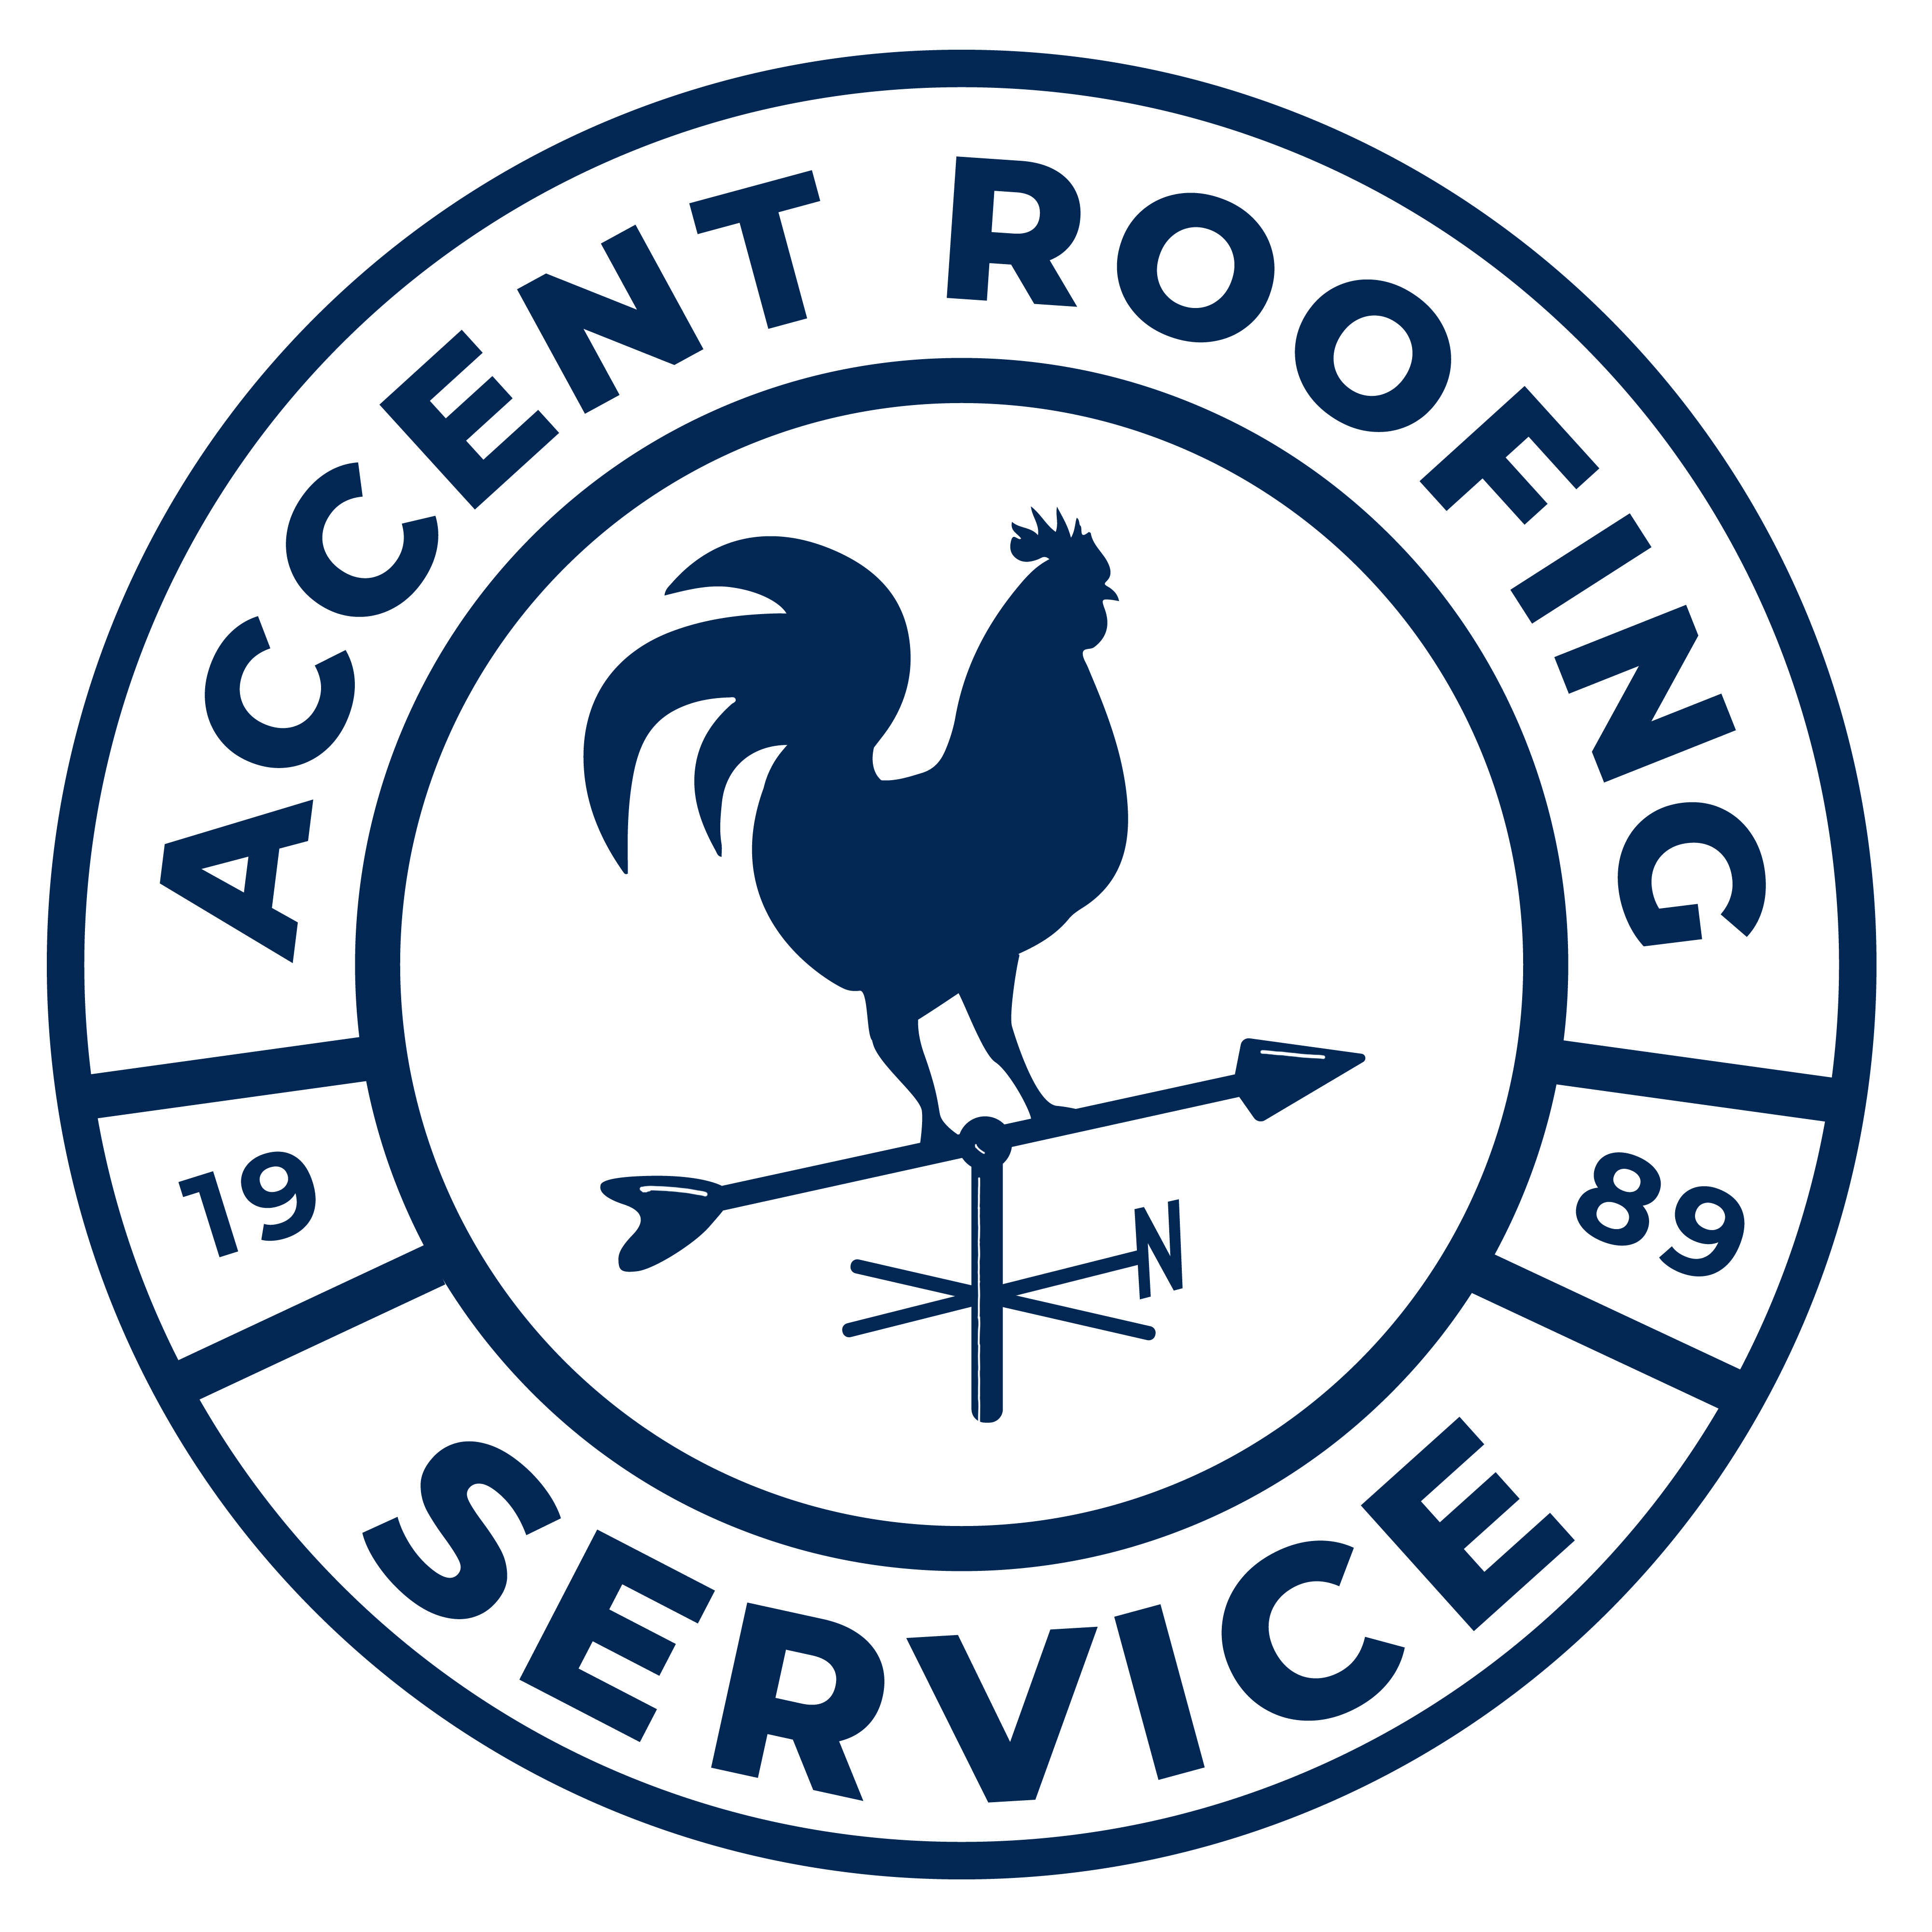 https://www.accentroofingservice.com/wp-content/uploads/2022/09/cropped-AccentRoofing-Circle-300x300-1.png